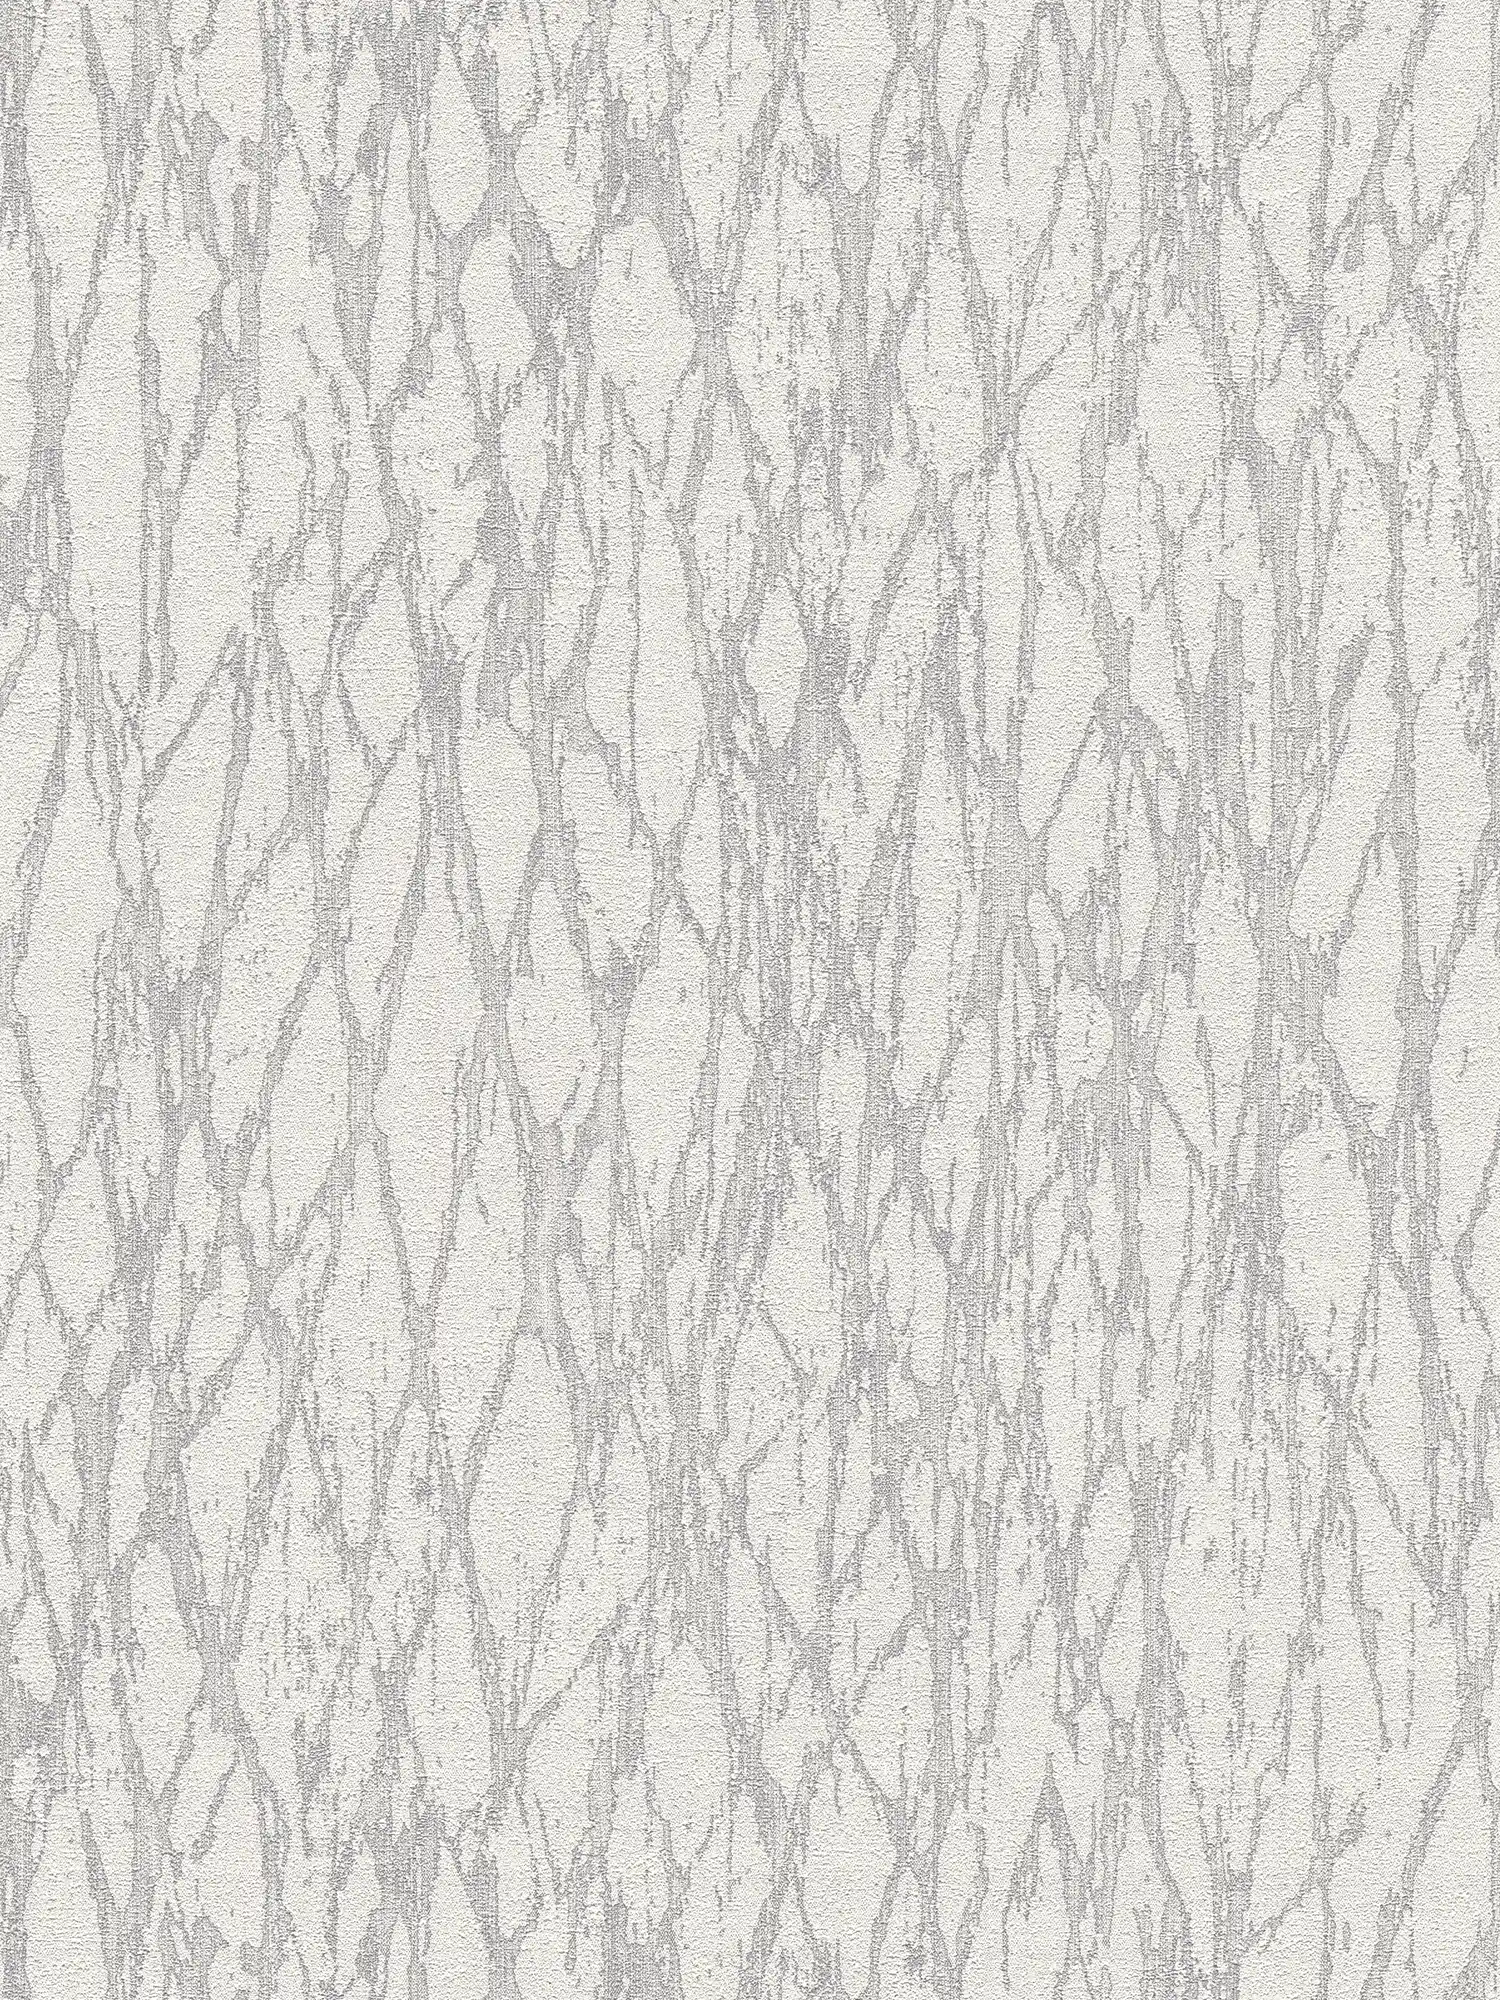 Non-woven wallpaper with abstract lines pattern slightly glossy - white, grey, silver
